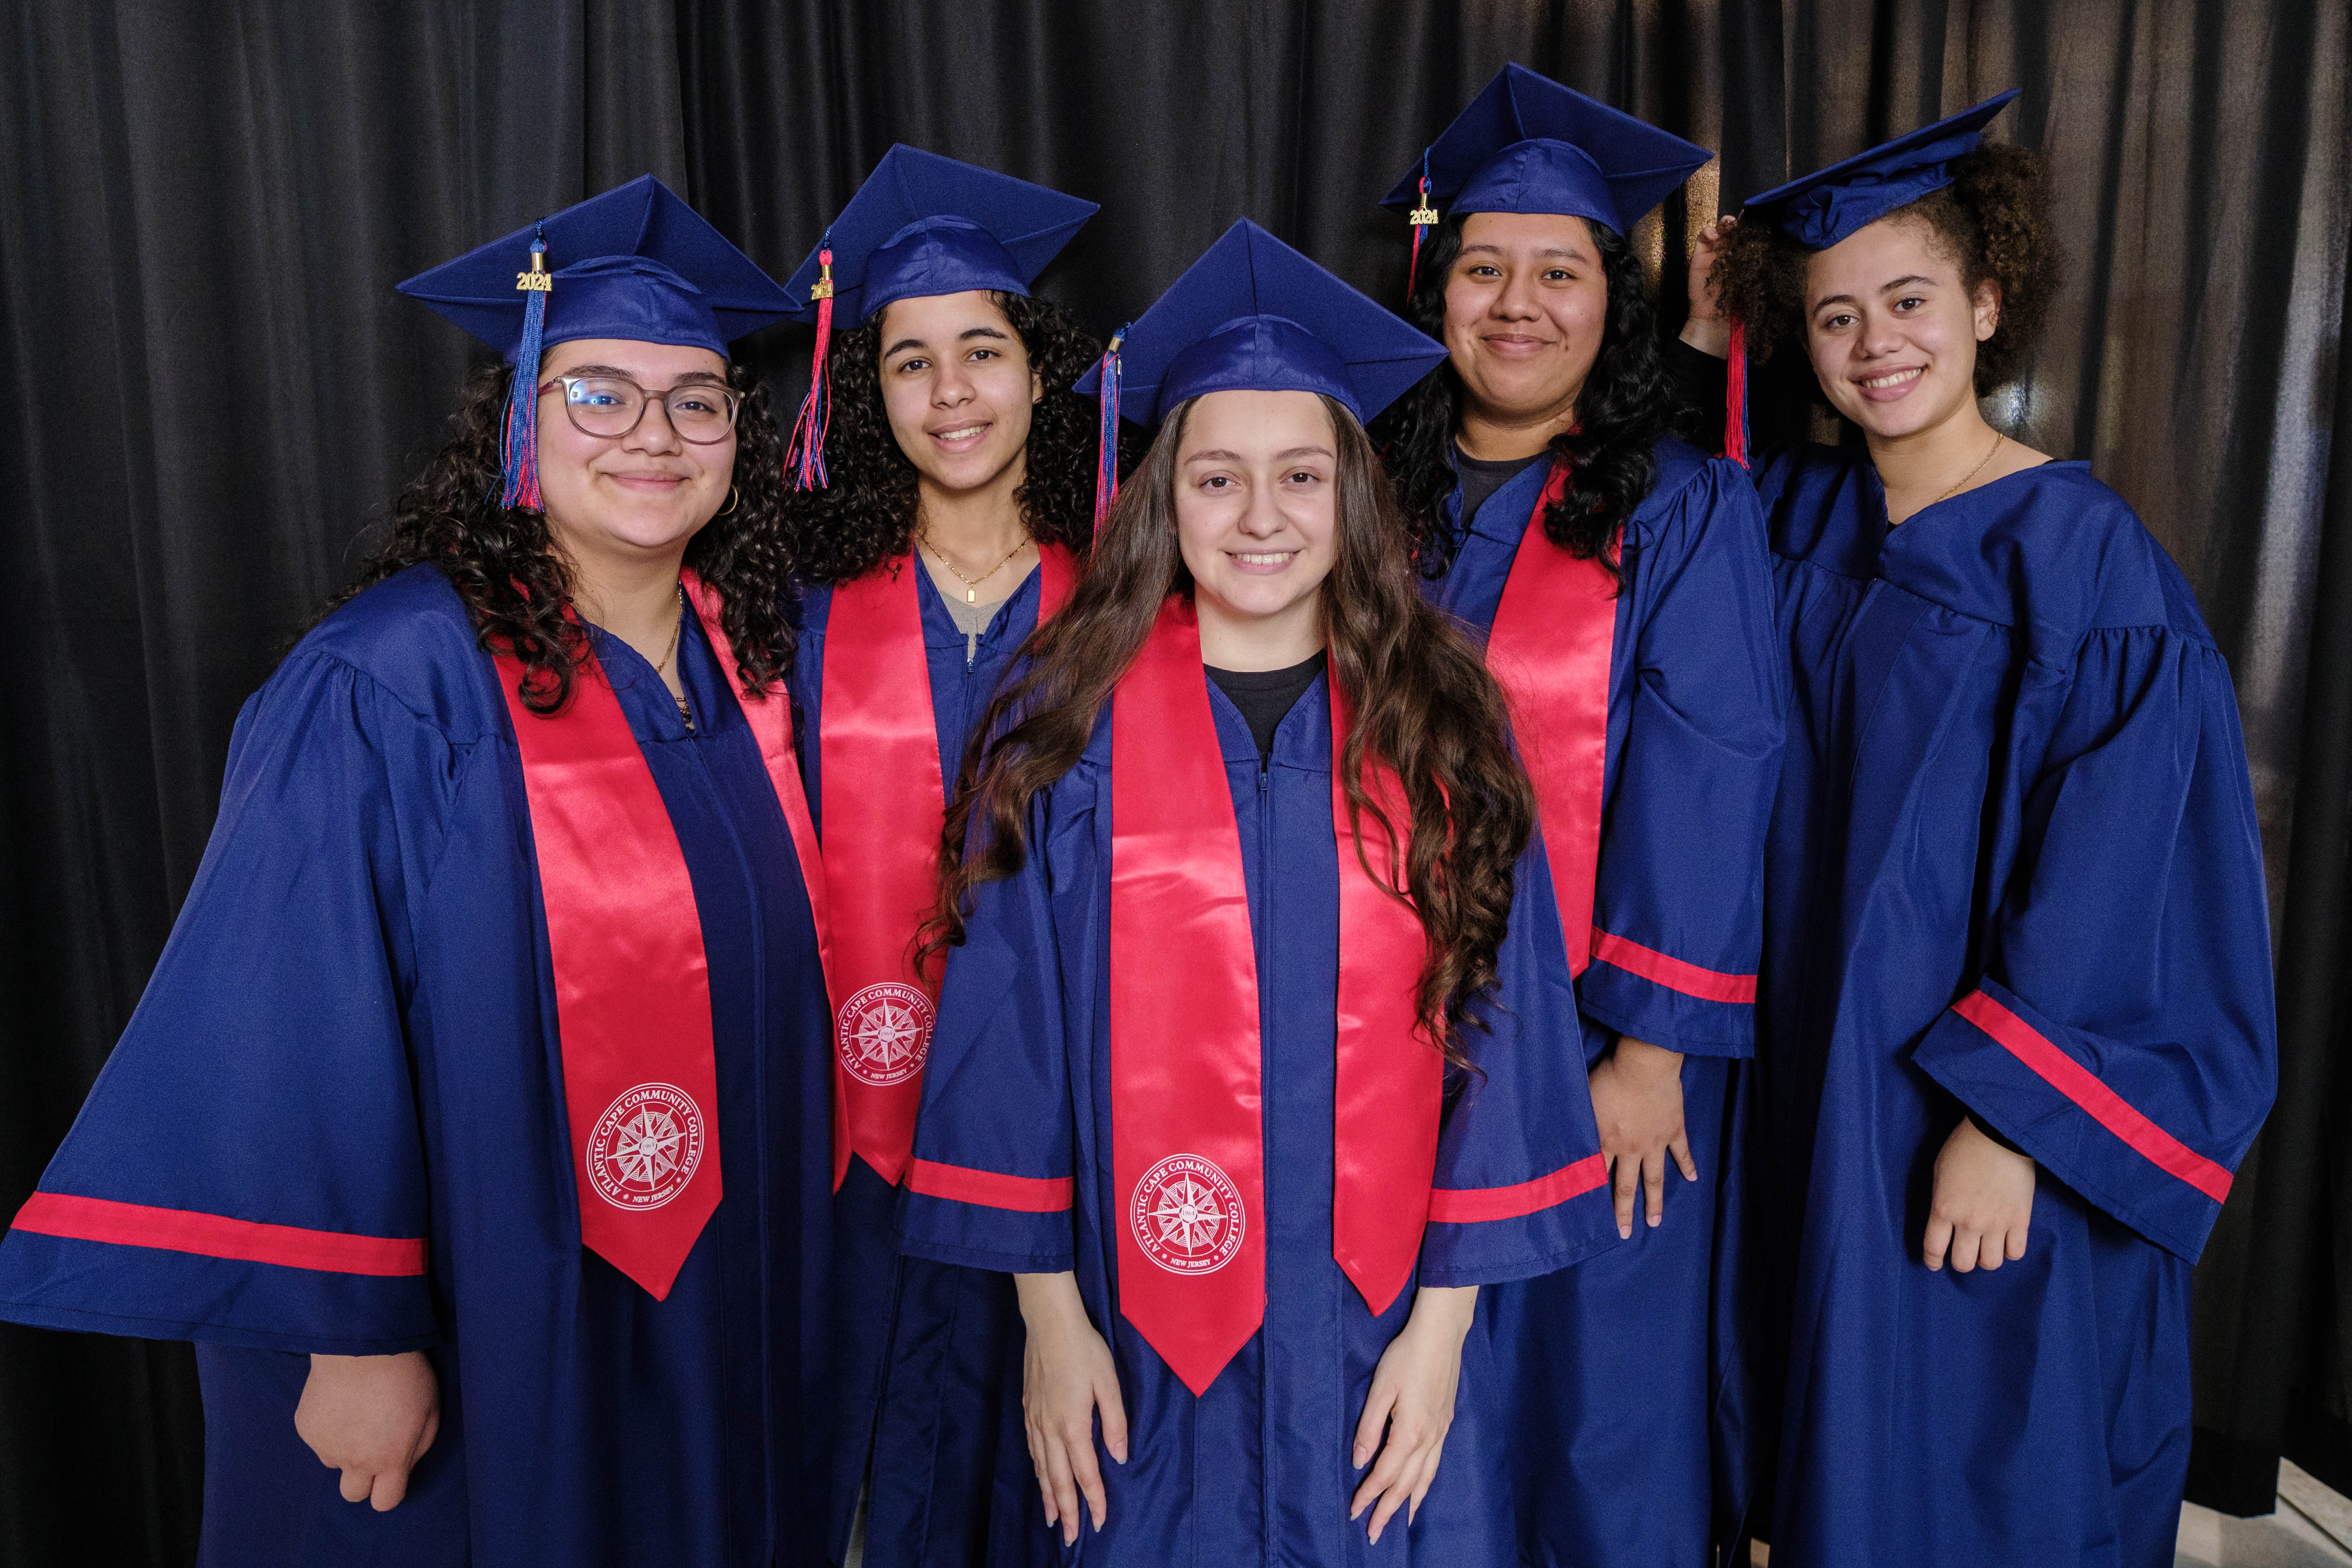 Pleasantville High School seniors who are also graduating with their associate's degrees from Atlantic Cape